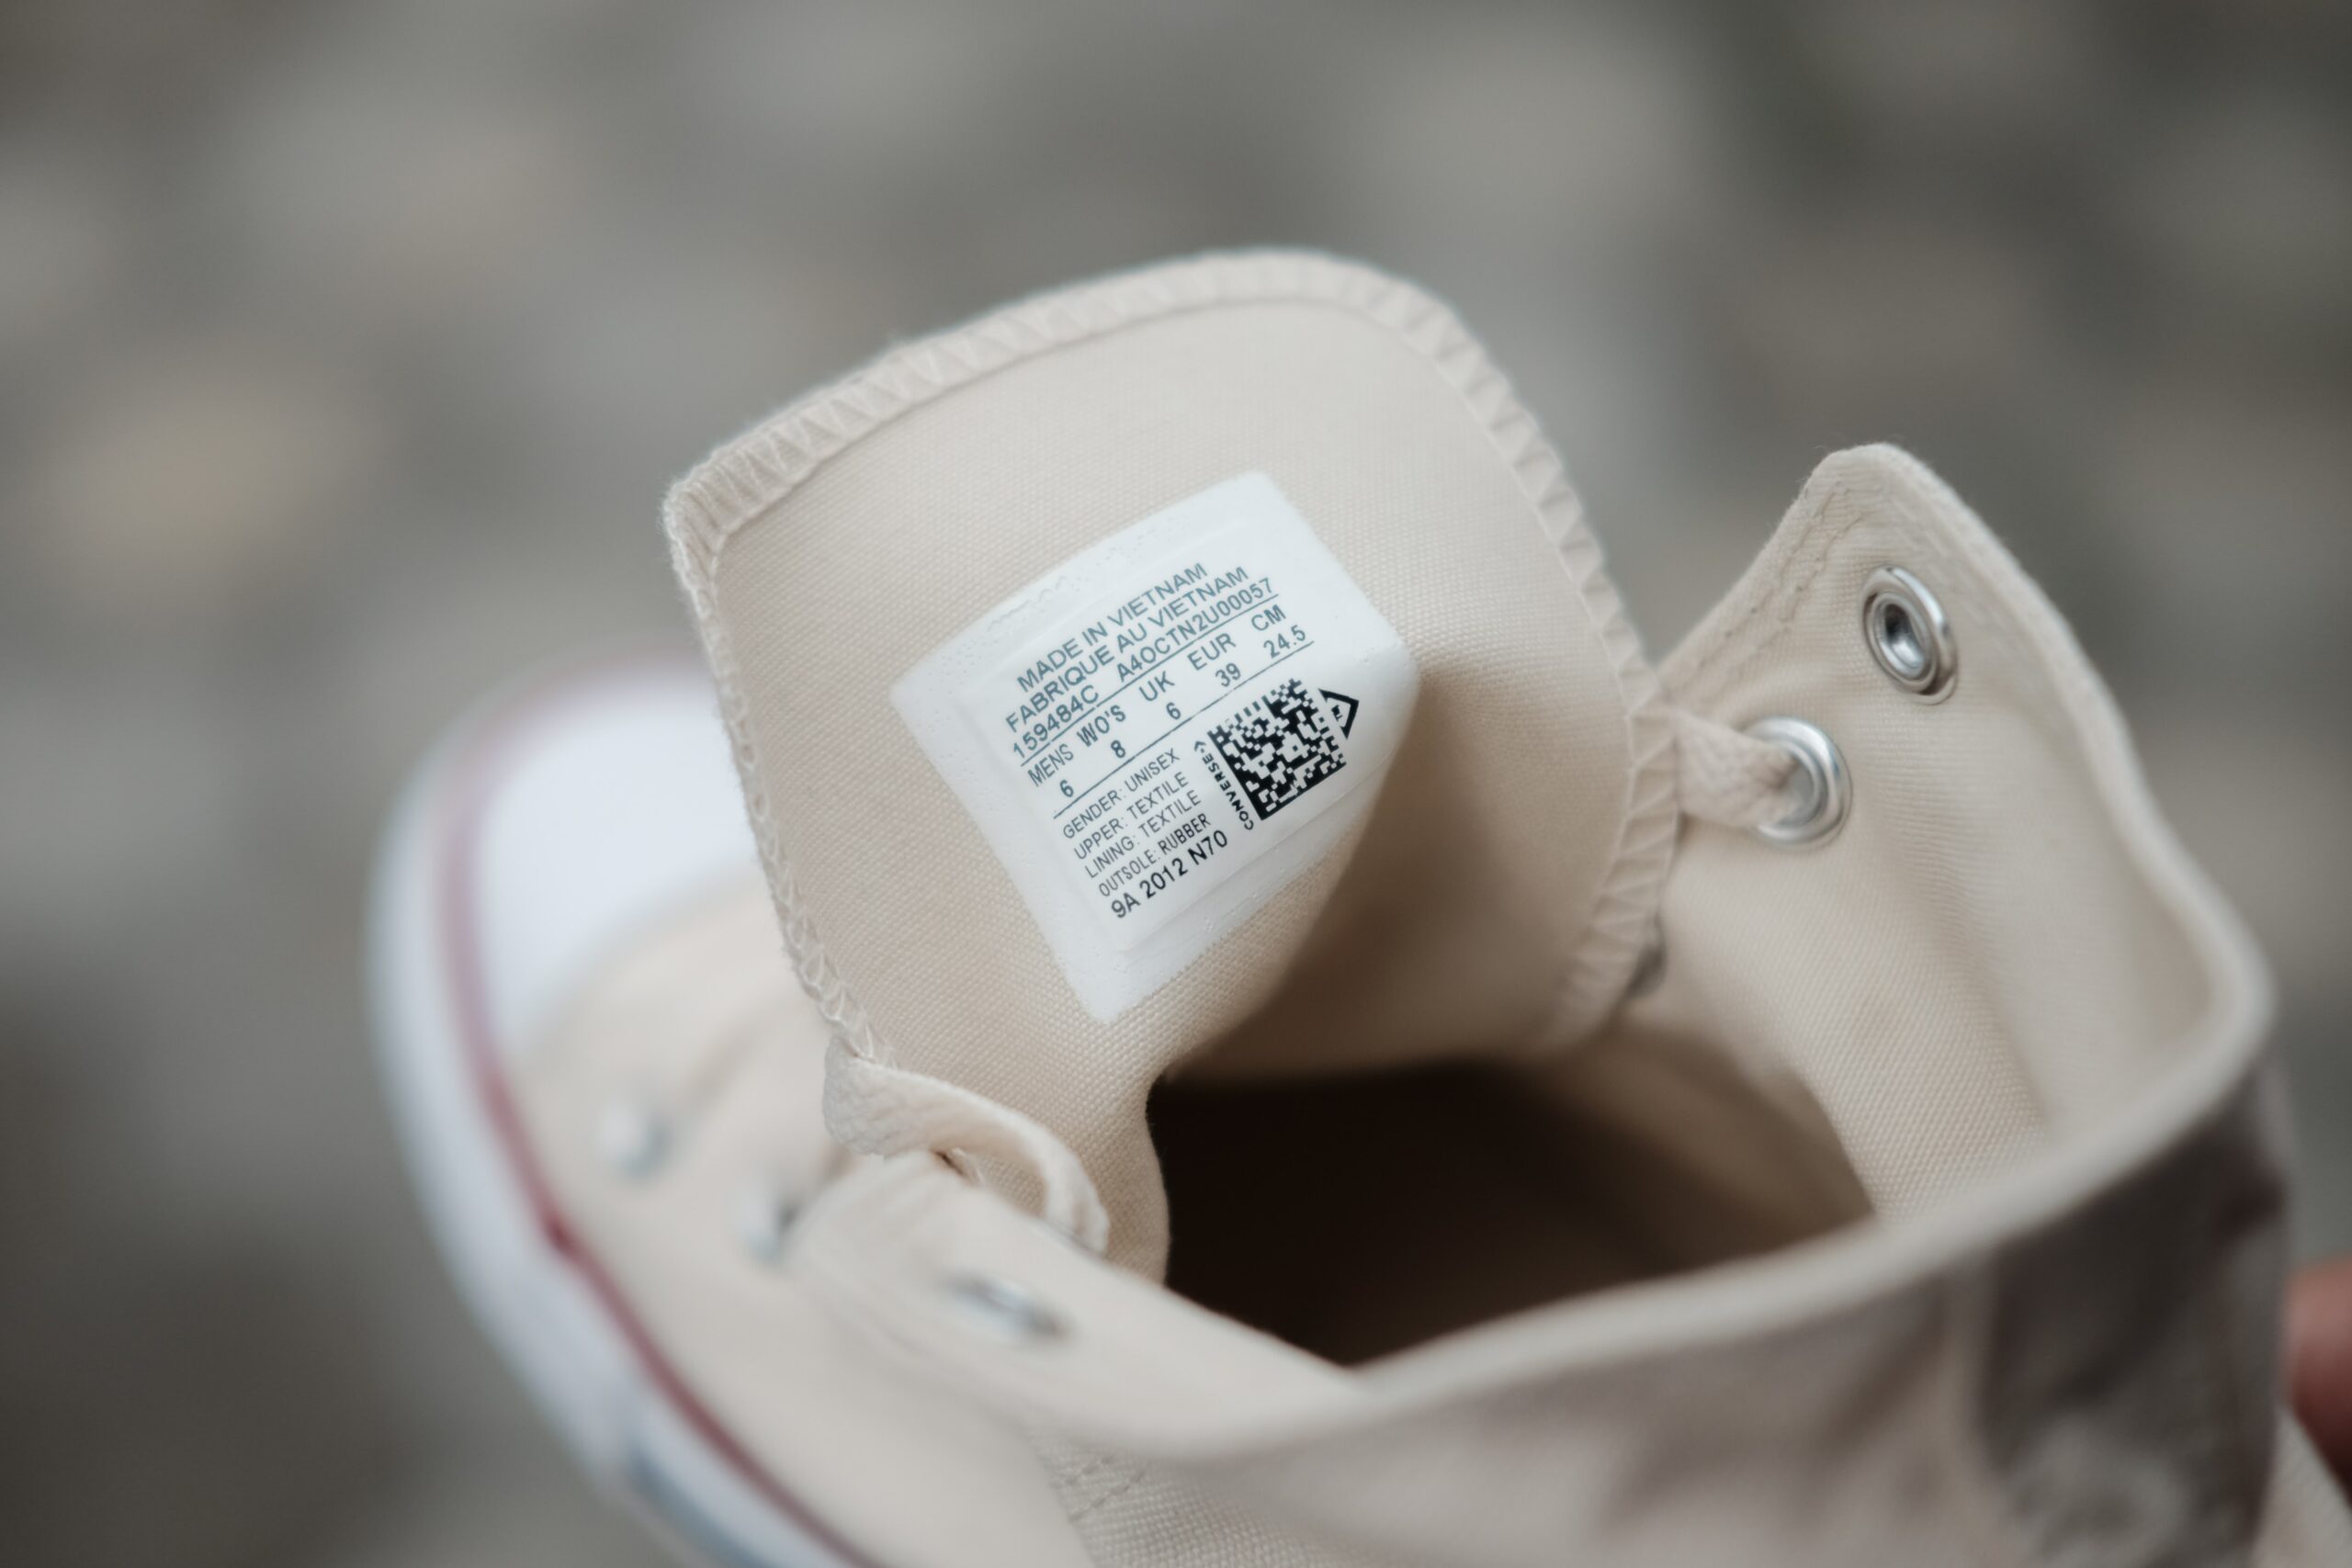 qr codes on clothing tags beige canvass shoe sneakers